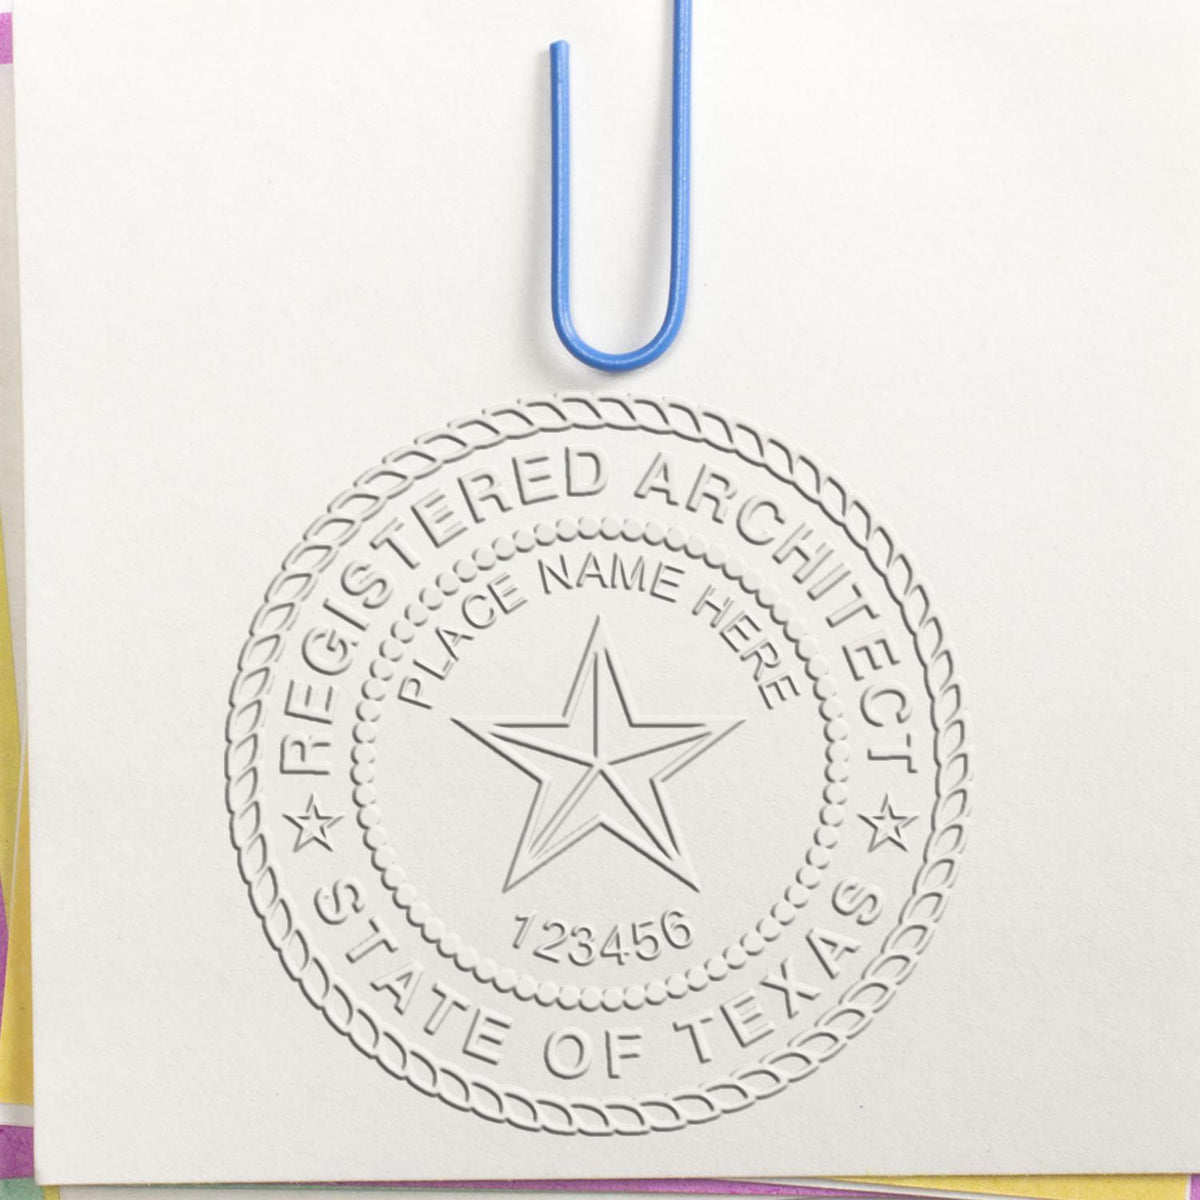 A photograph of the Hybrid Texas Architect Seal stamp impression reveals a vivid, professional image of the on paper.